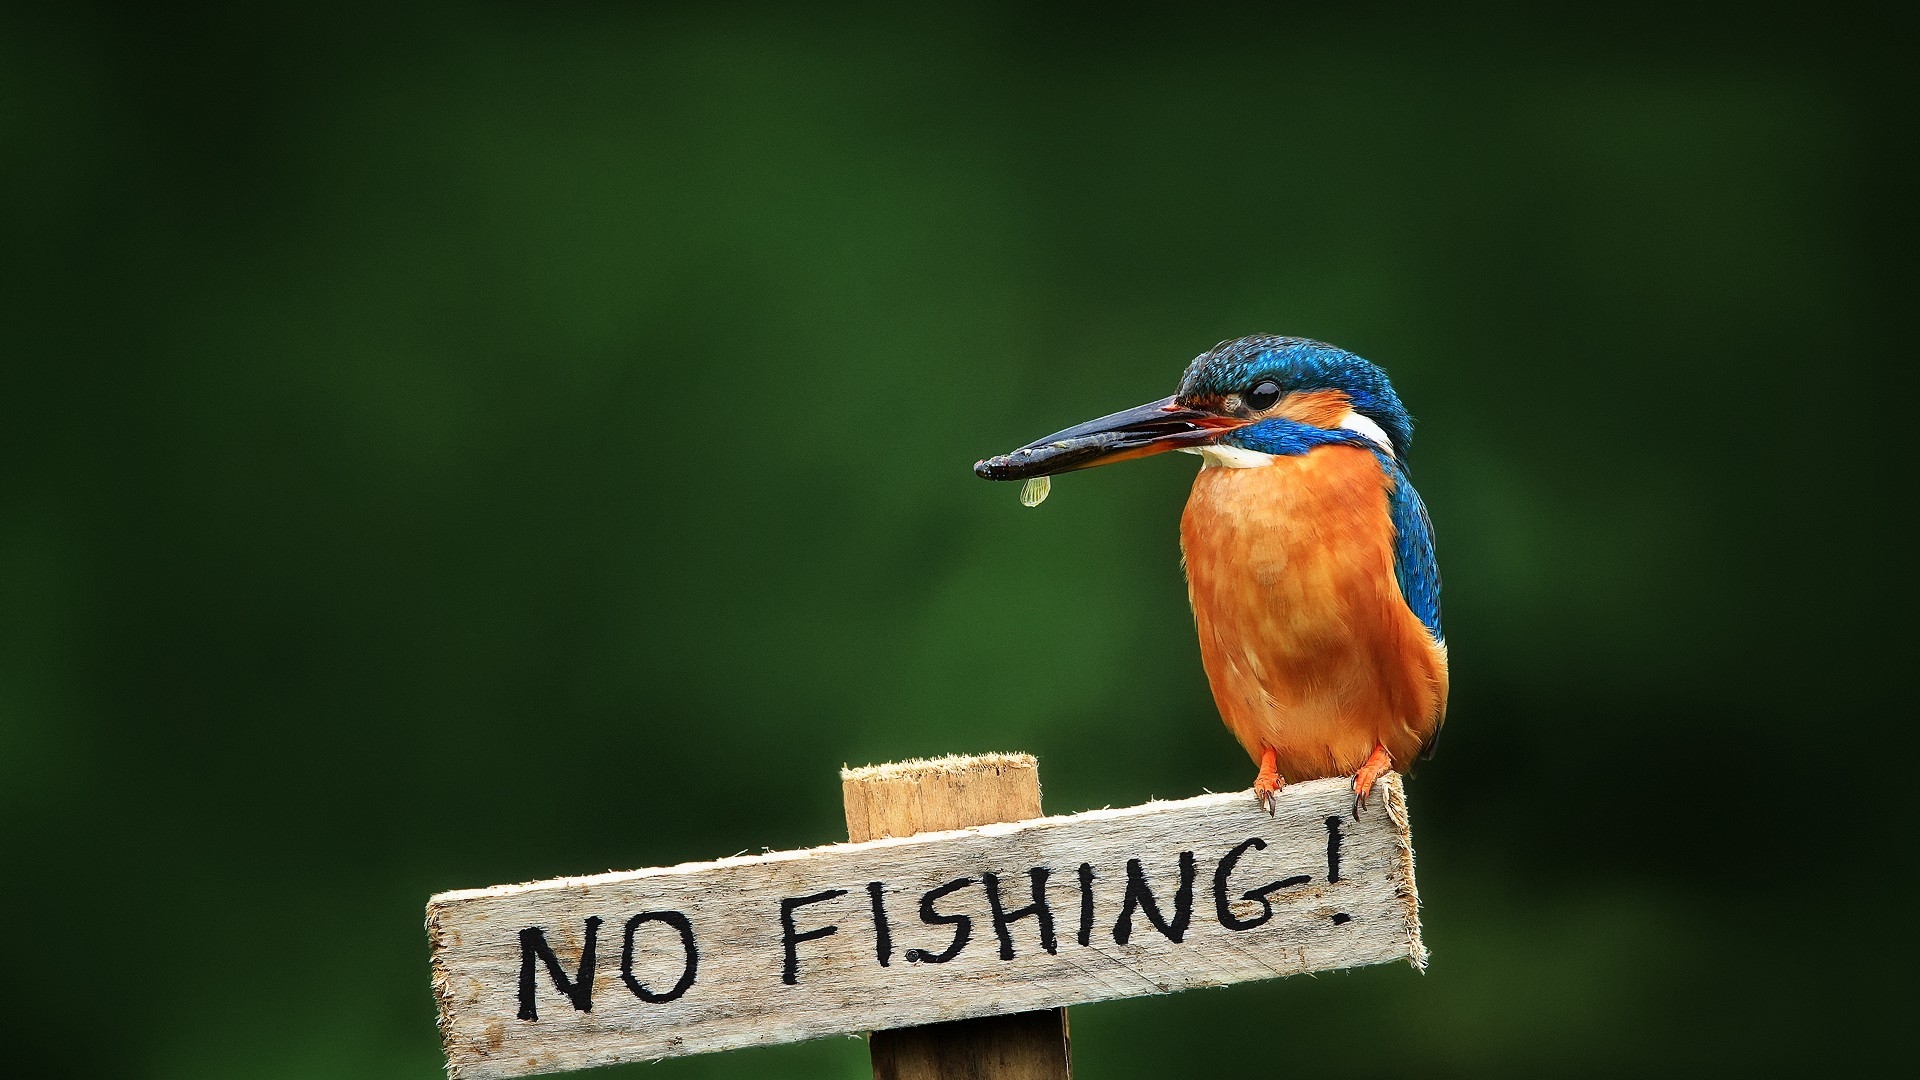 No Fishing for 1920 x 1080 HDTV 1080p resolution